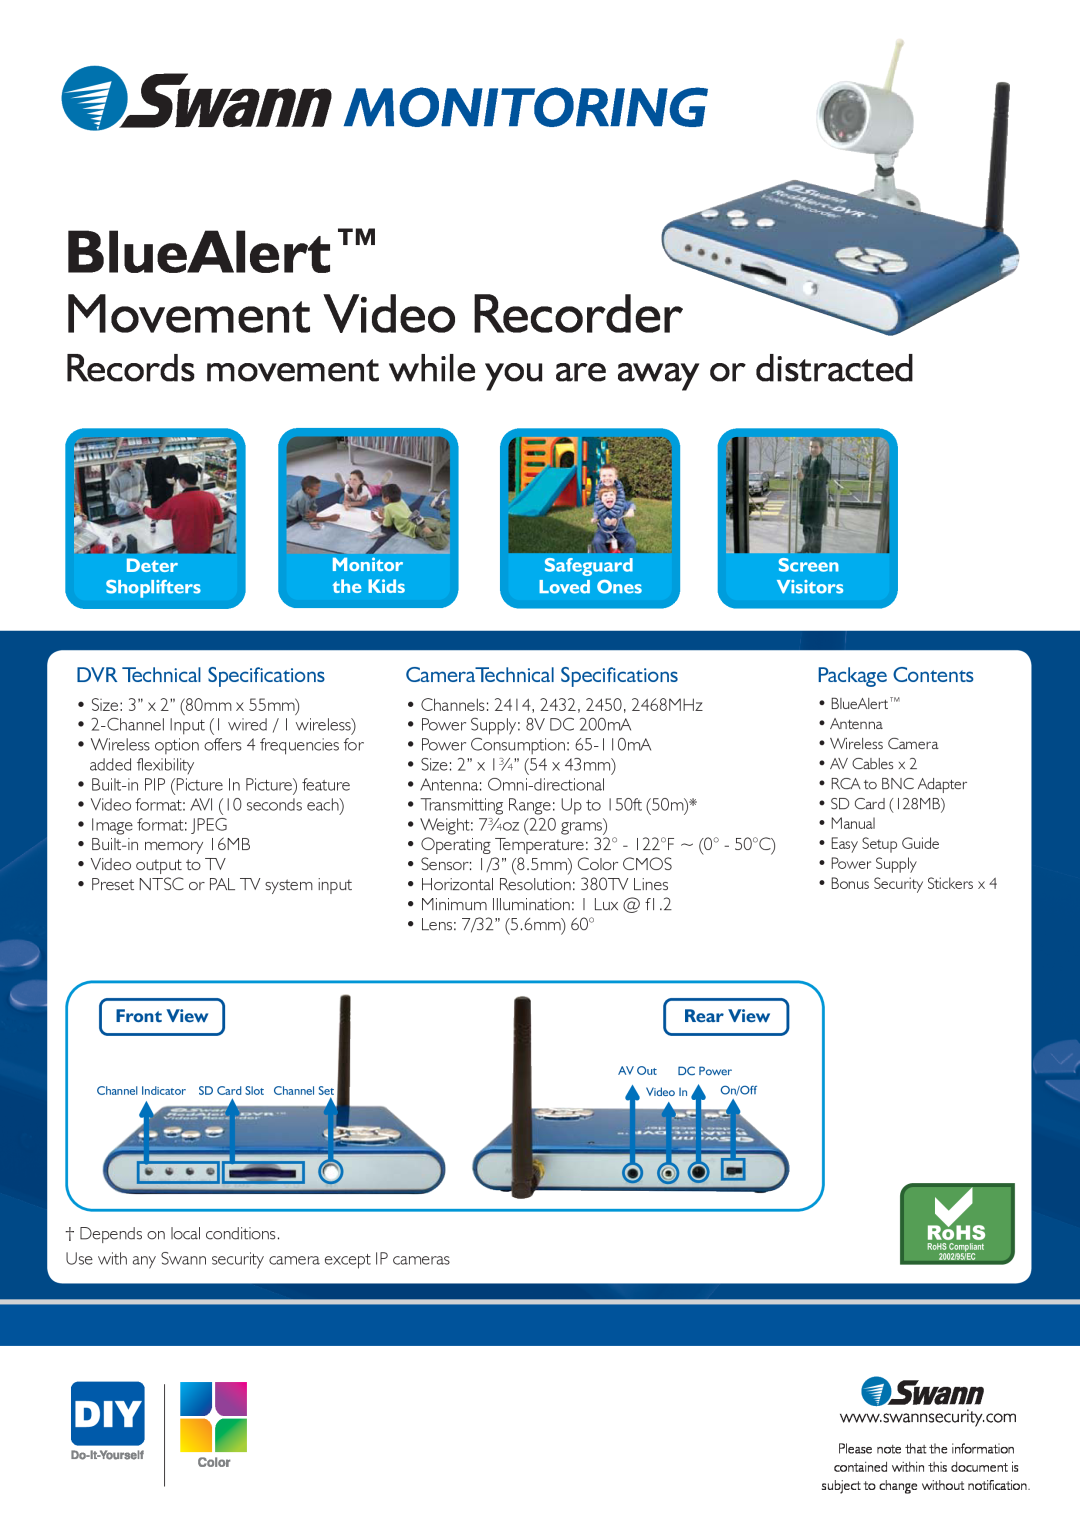 Swann SW242-WBW BlueAlert, Monitoring, Movement Video Recorder, Records movement while you are away or distracted, Deter 